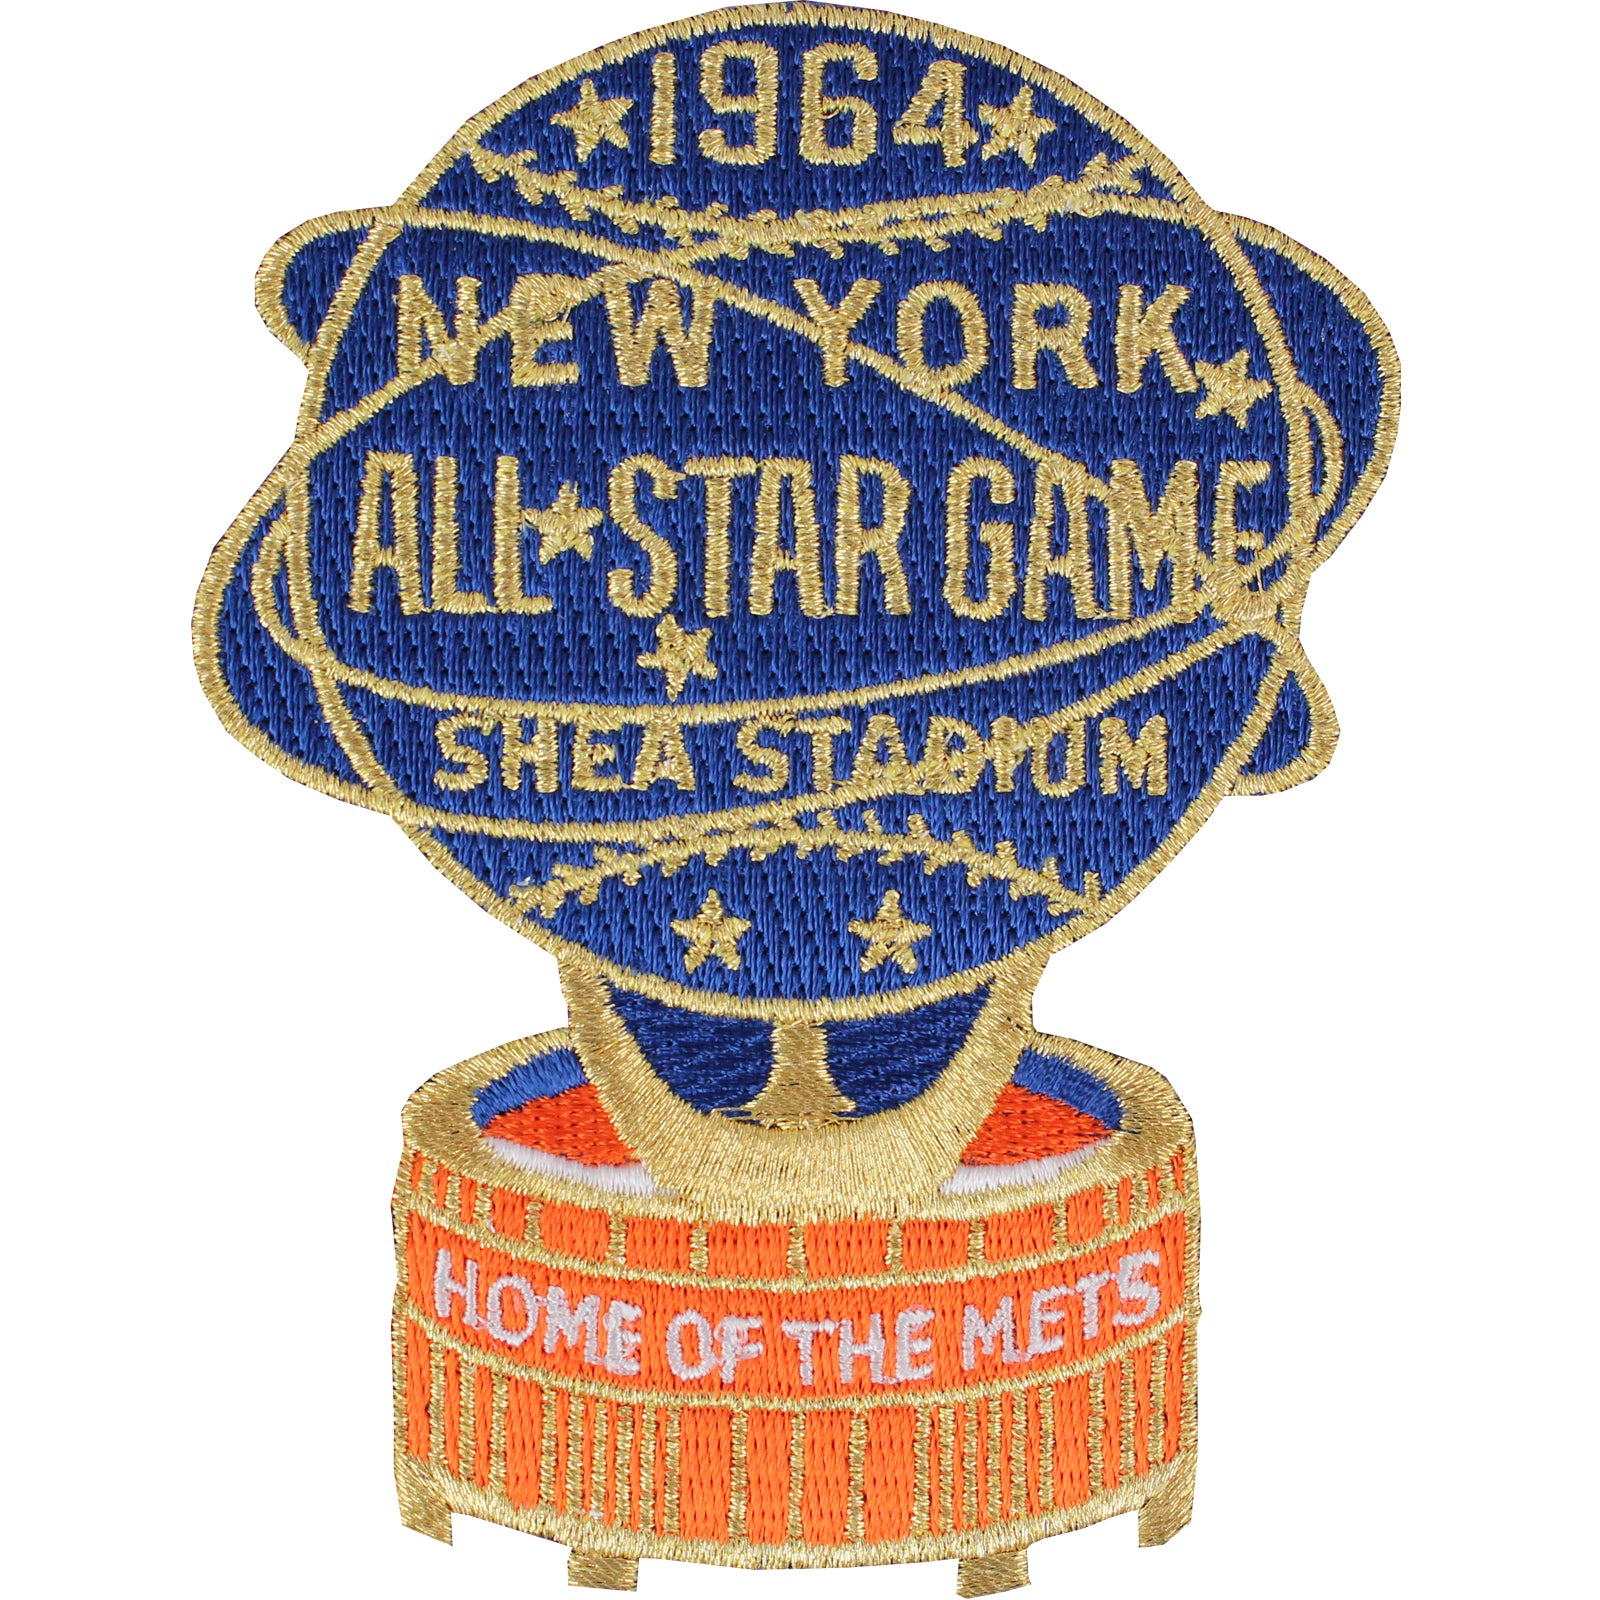 New York Mets - Patch - Back Patches